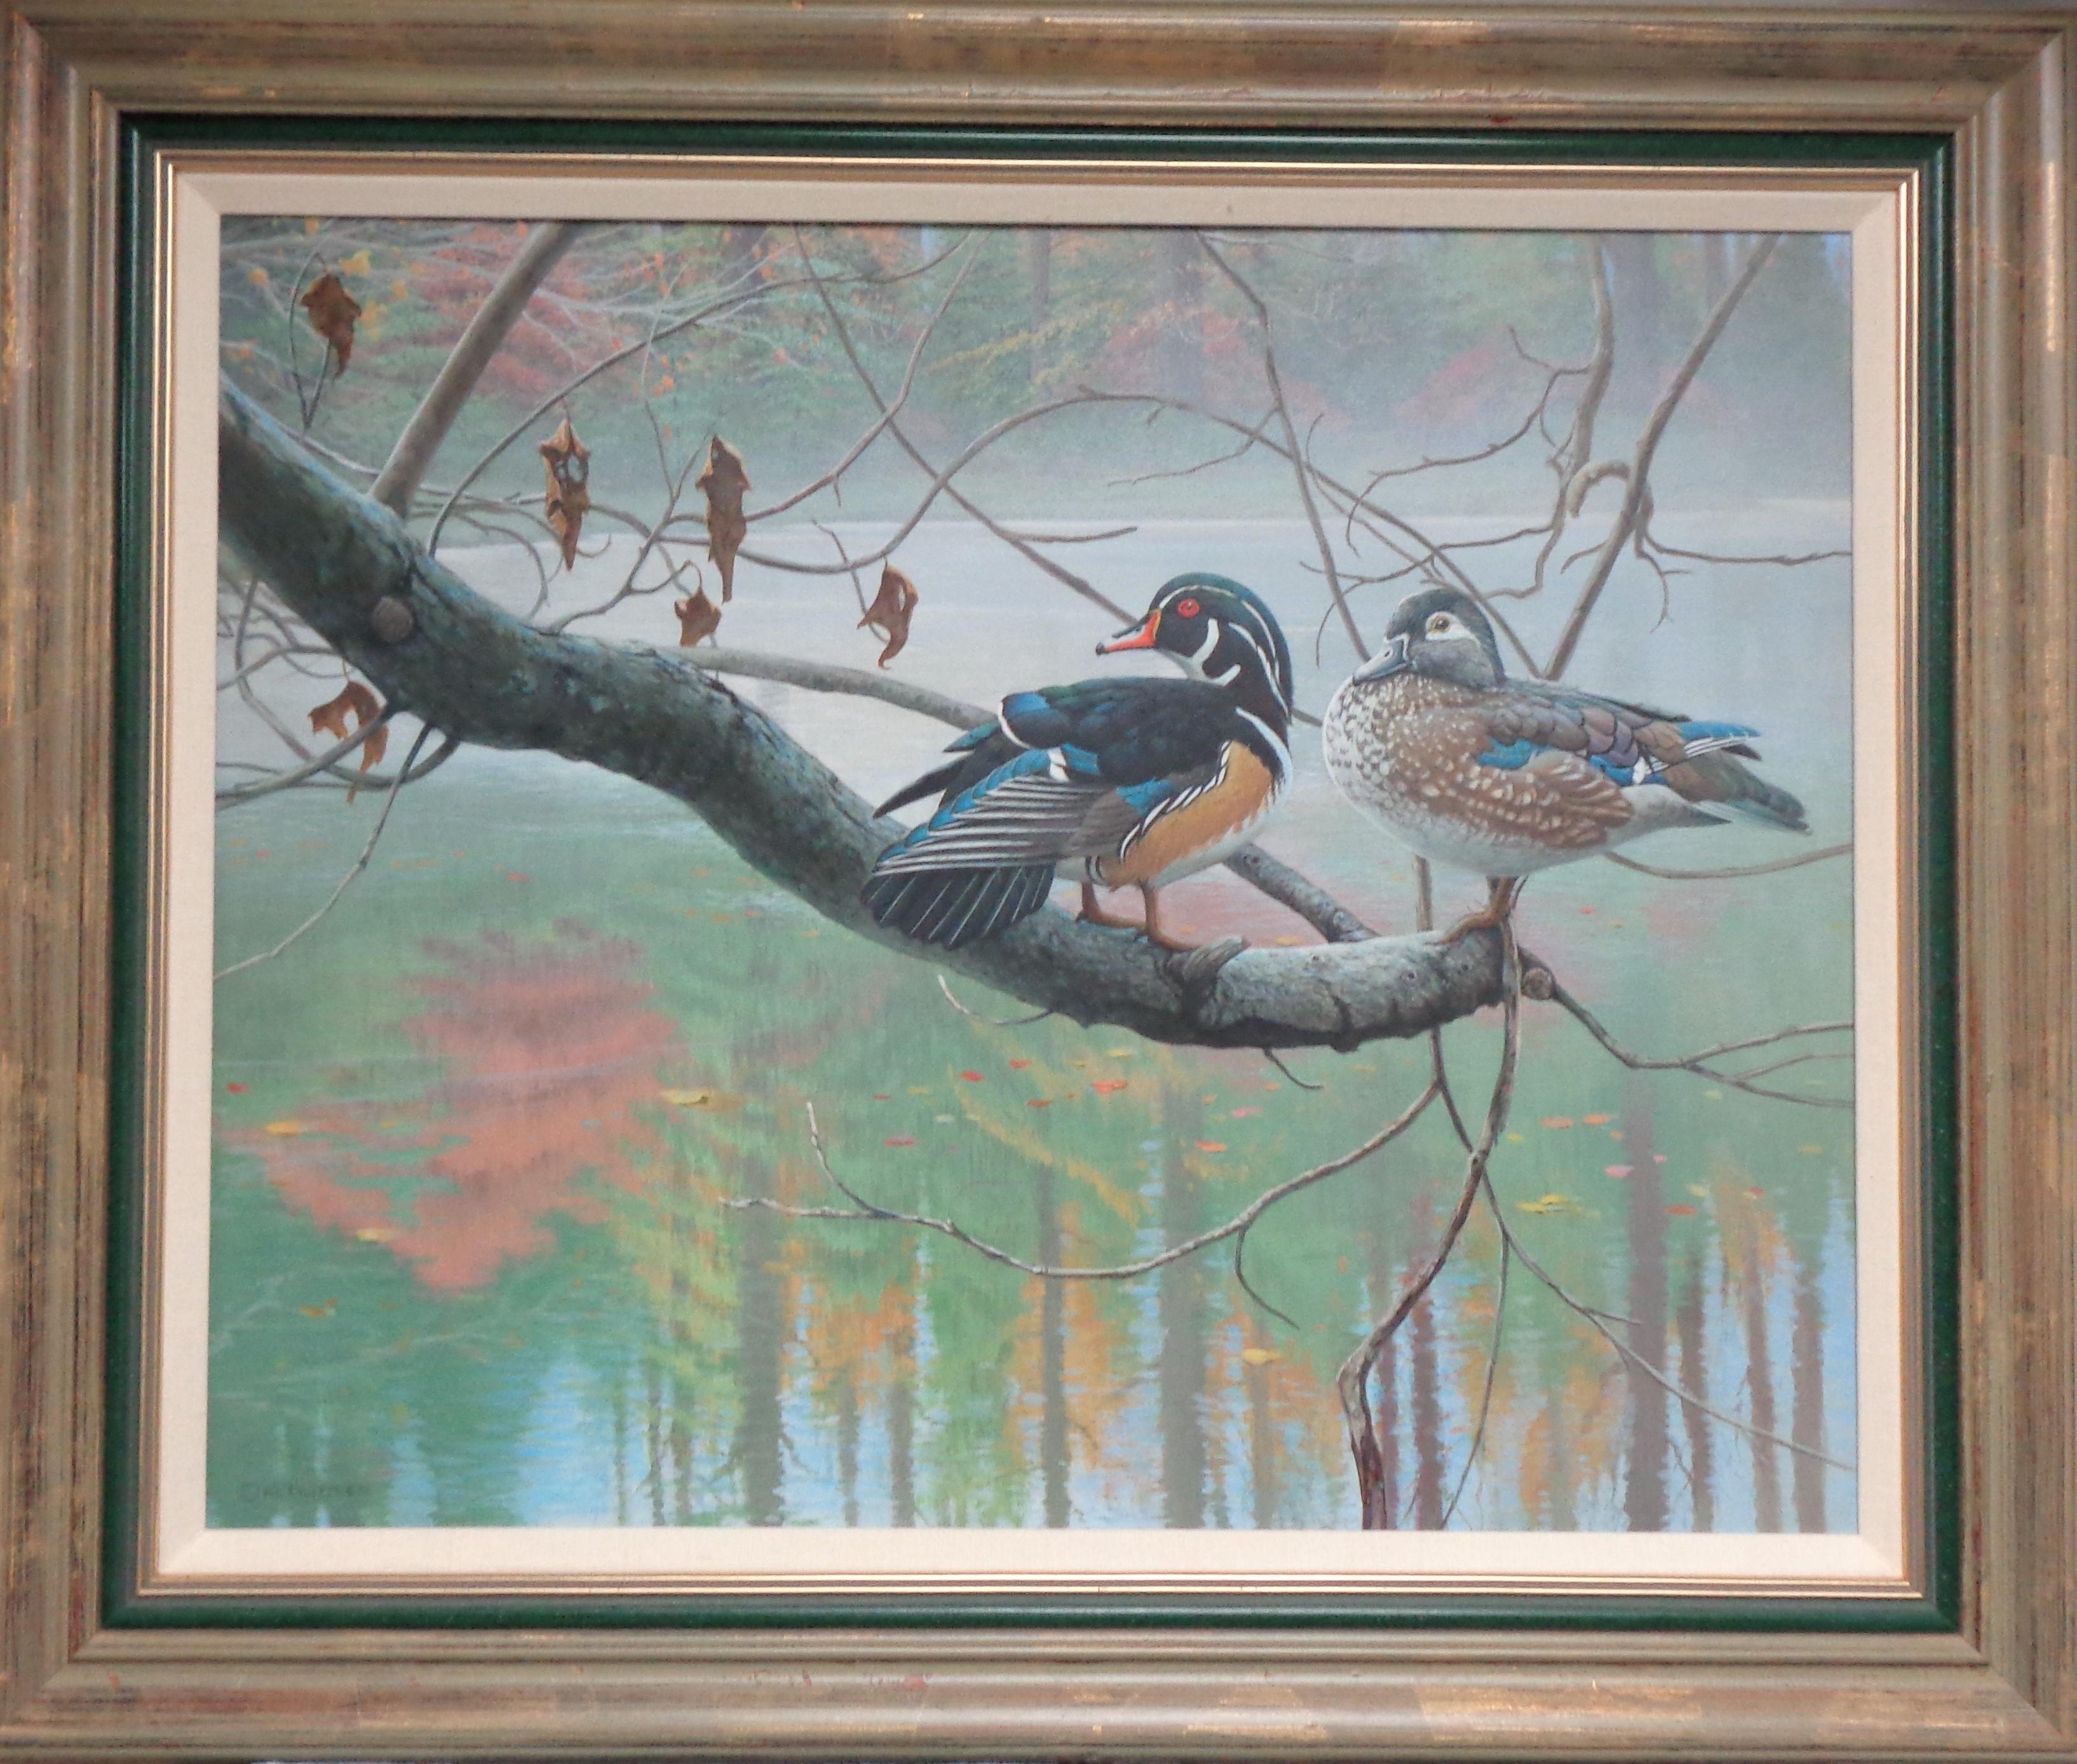 An "AWARD WINNING" acrylic painting on panel by award winning contemporary artist Michael Budden that showcases a gorgeous pair of Wood Ducks in their natural environment created in an impressionistic realism style. The painting exudes the very rich